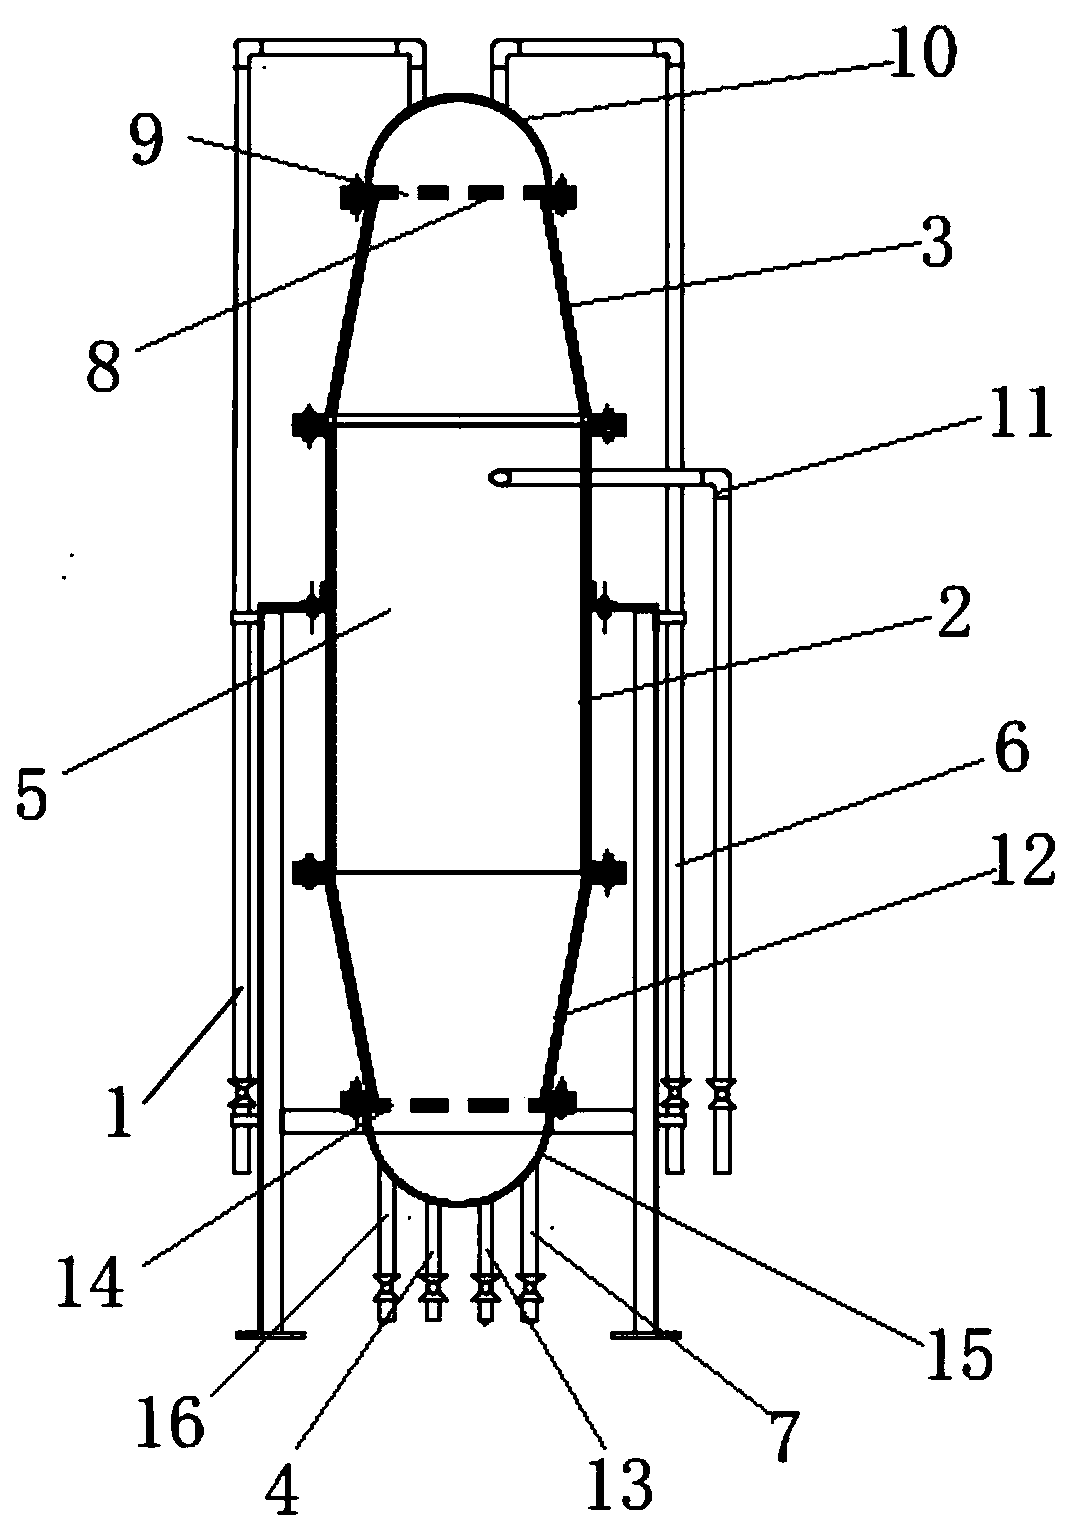 Self-cleaning filtering device